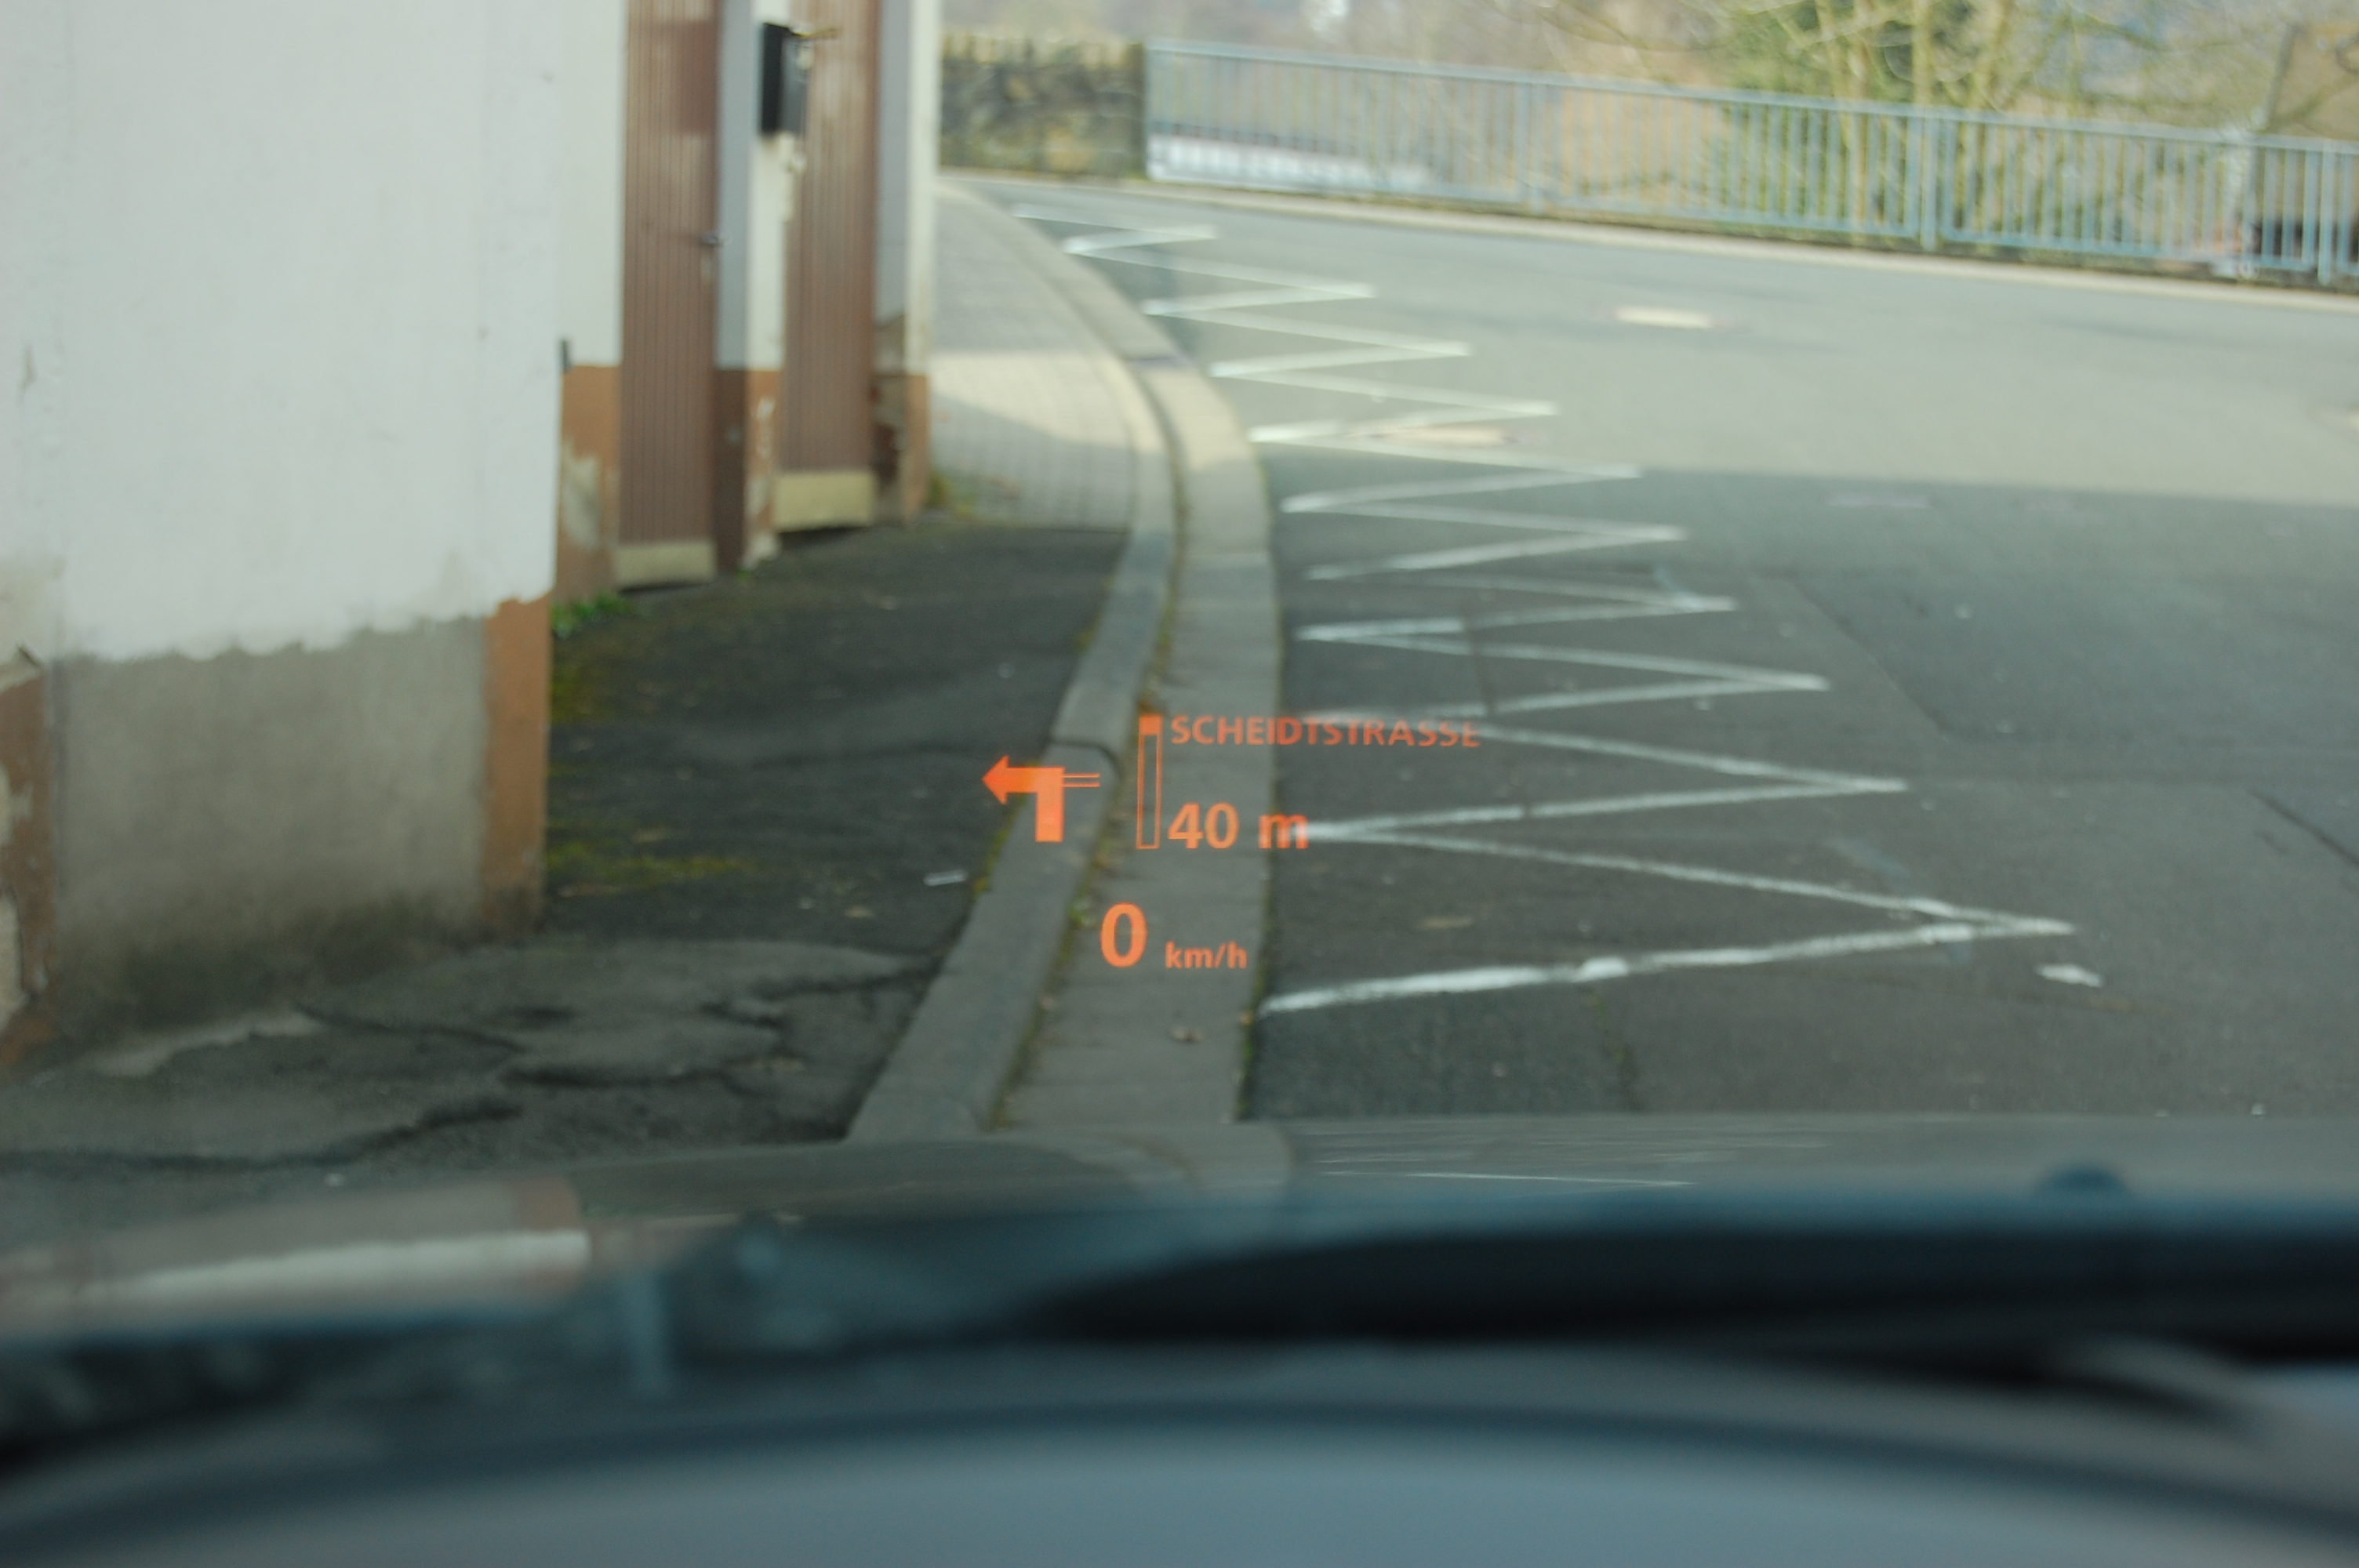 Does bmw heads up display work #6